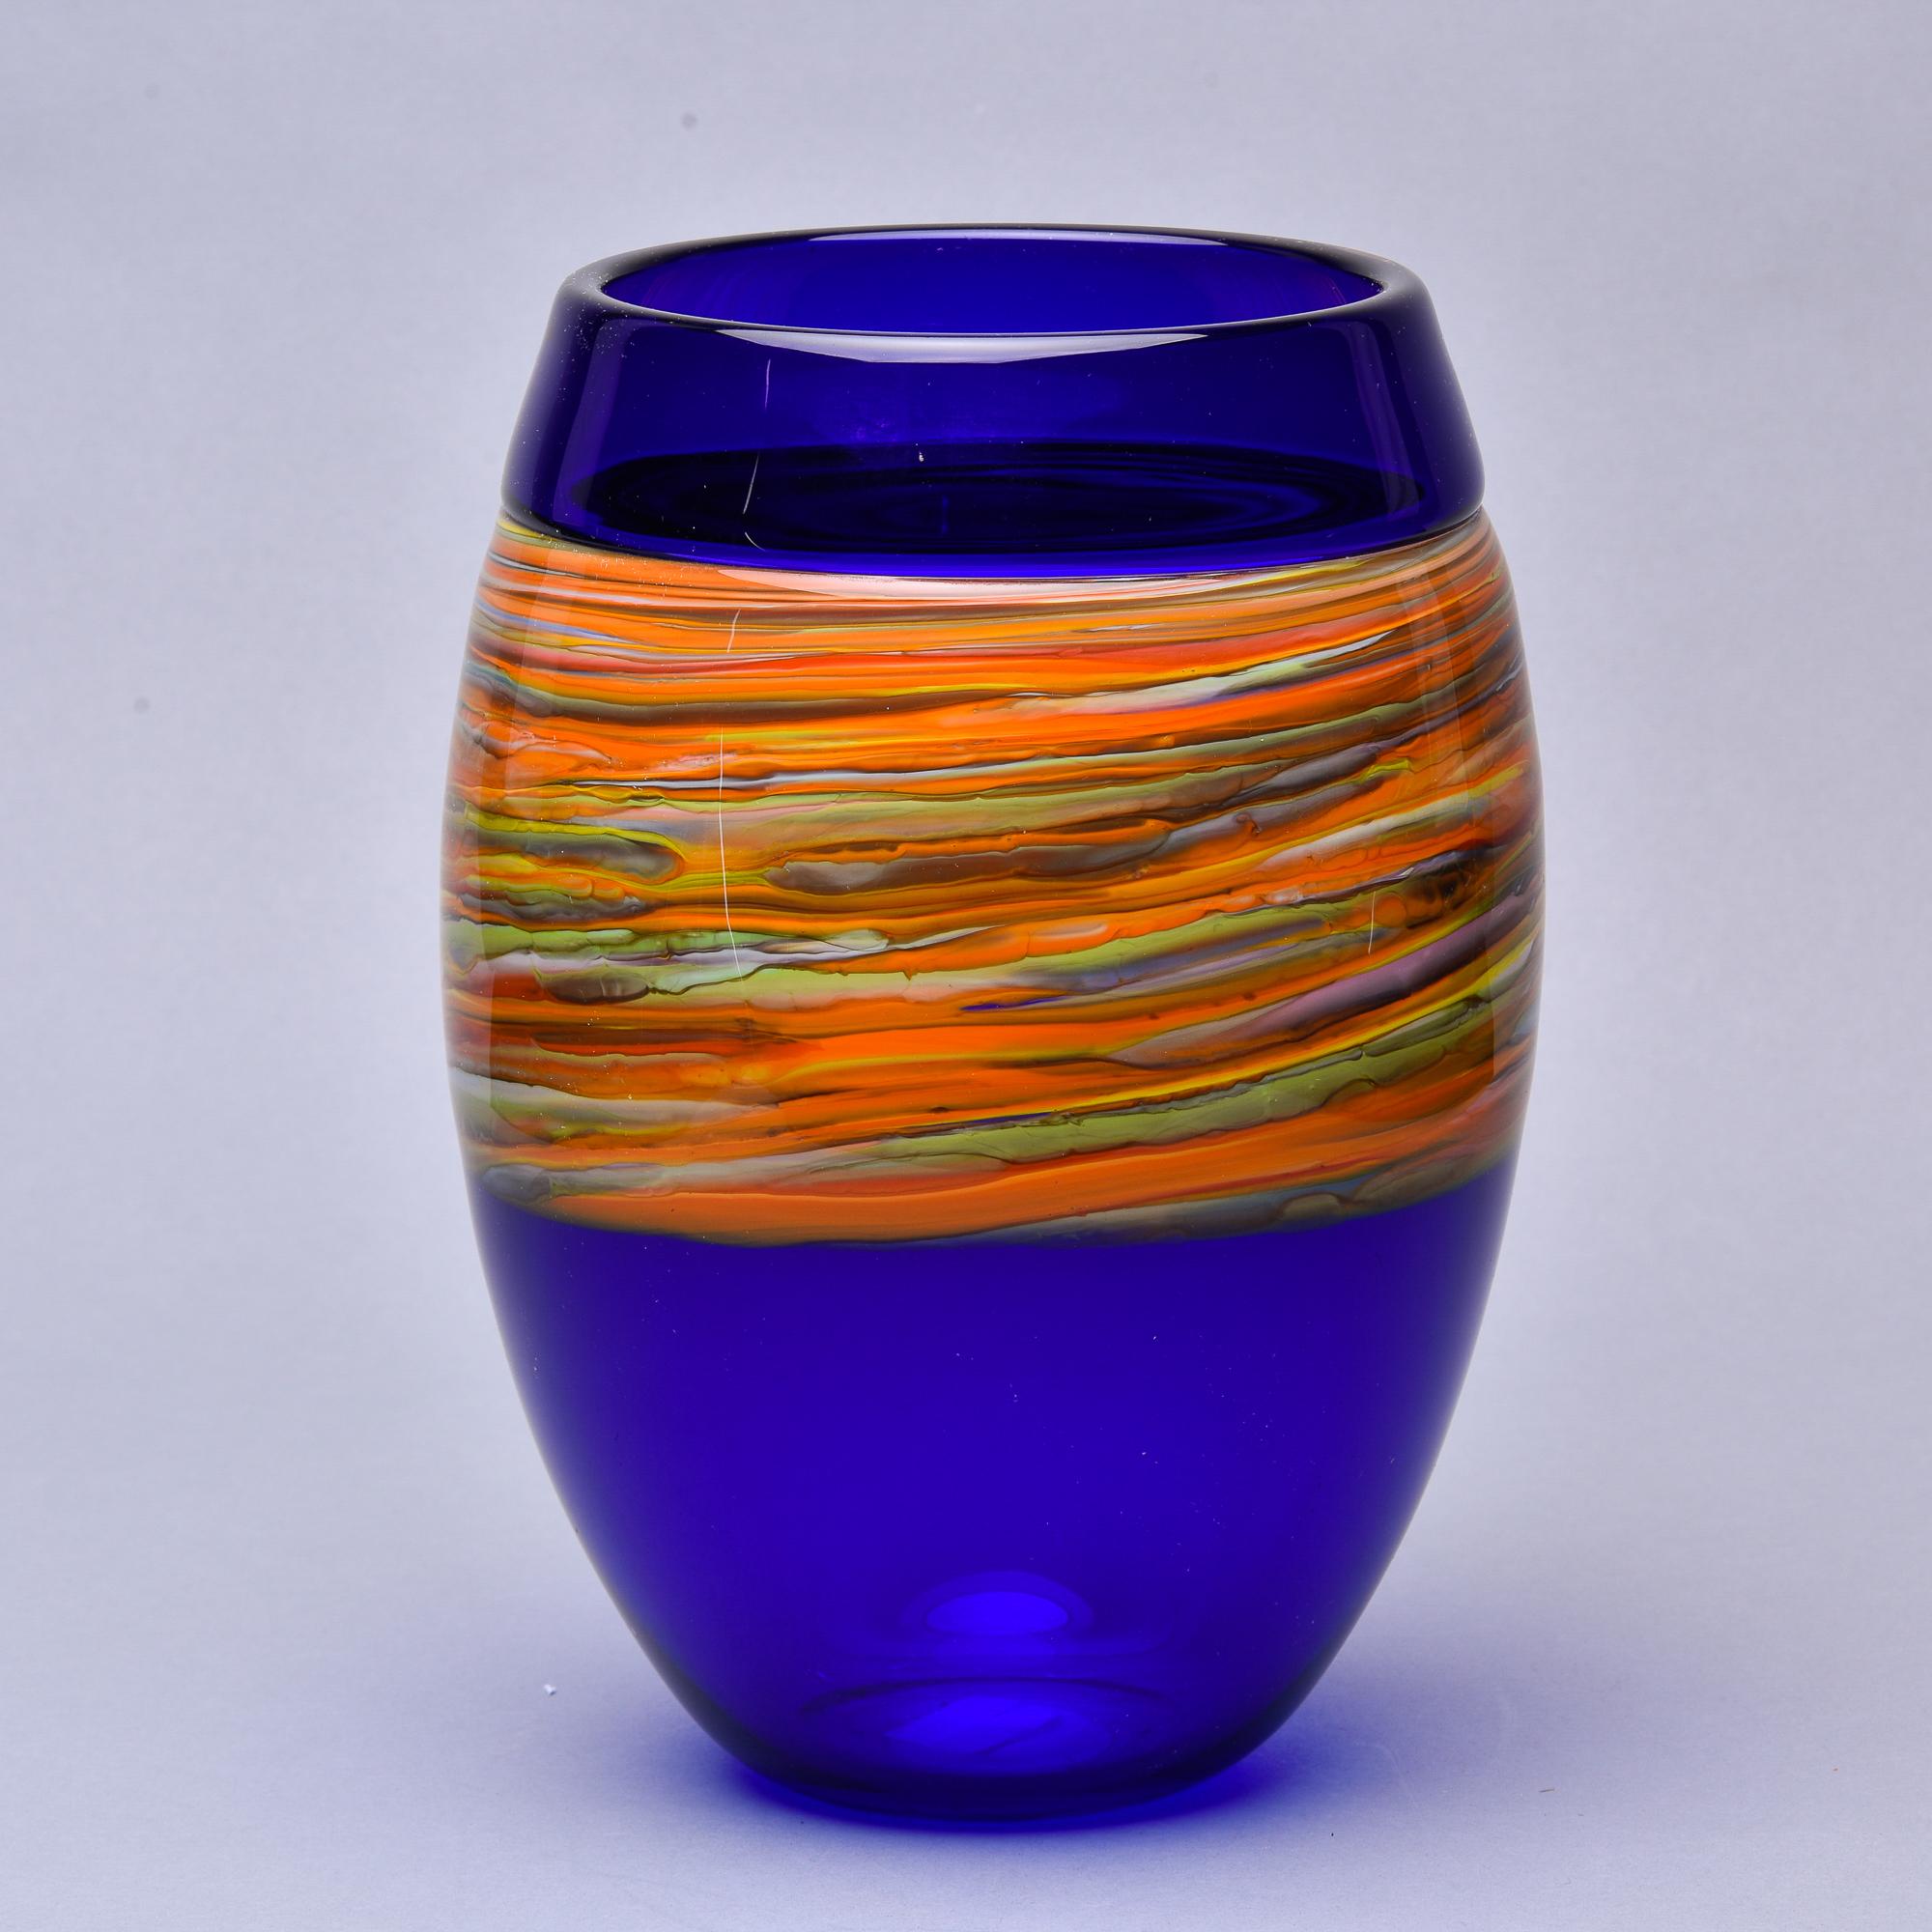 Found in Italy, this circa 1970s signed Cenedese Murano glass vase features a saturated cobalt blue body with a wide, streaky band of orange and yellow with accents of green and white. Substantial size - just under 12” tall. Etched Cenedese